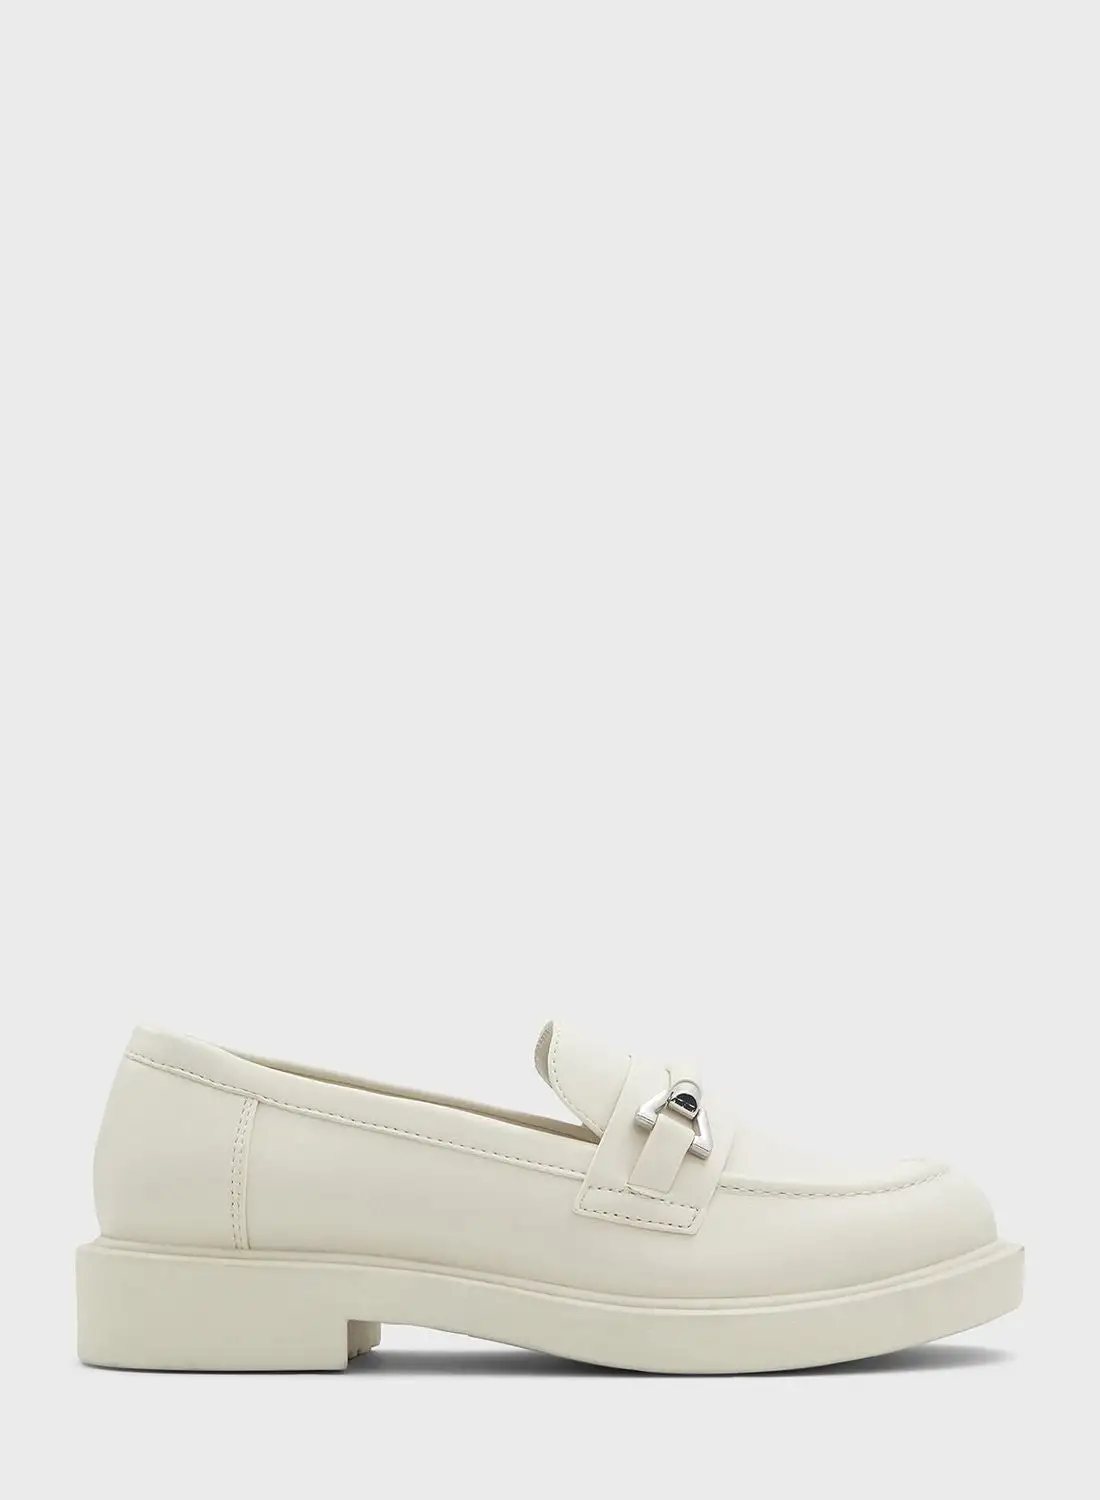 CALL IT SPRING Amoure Loafers